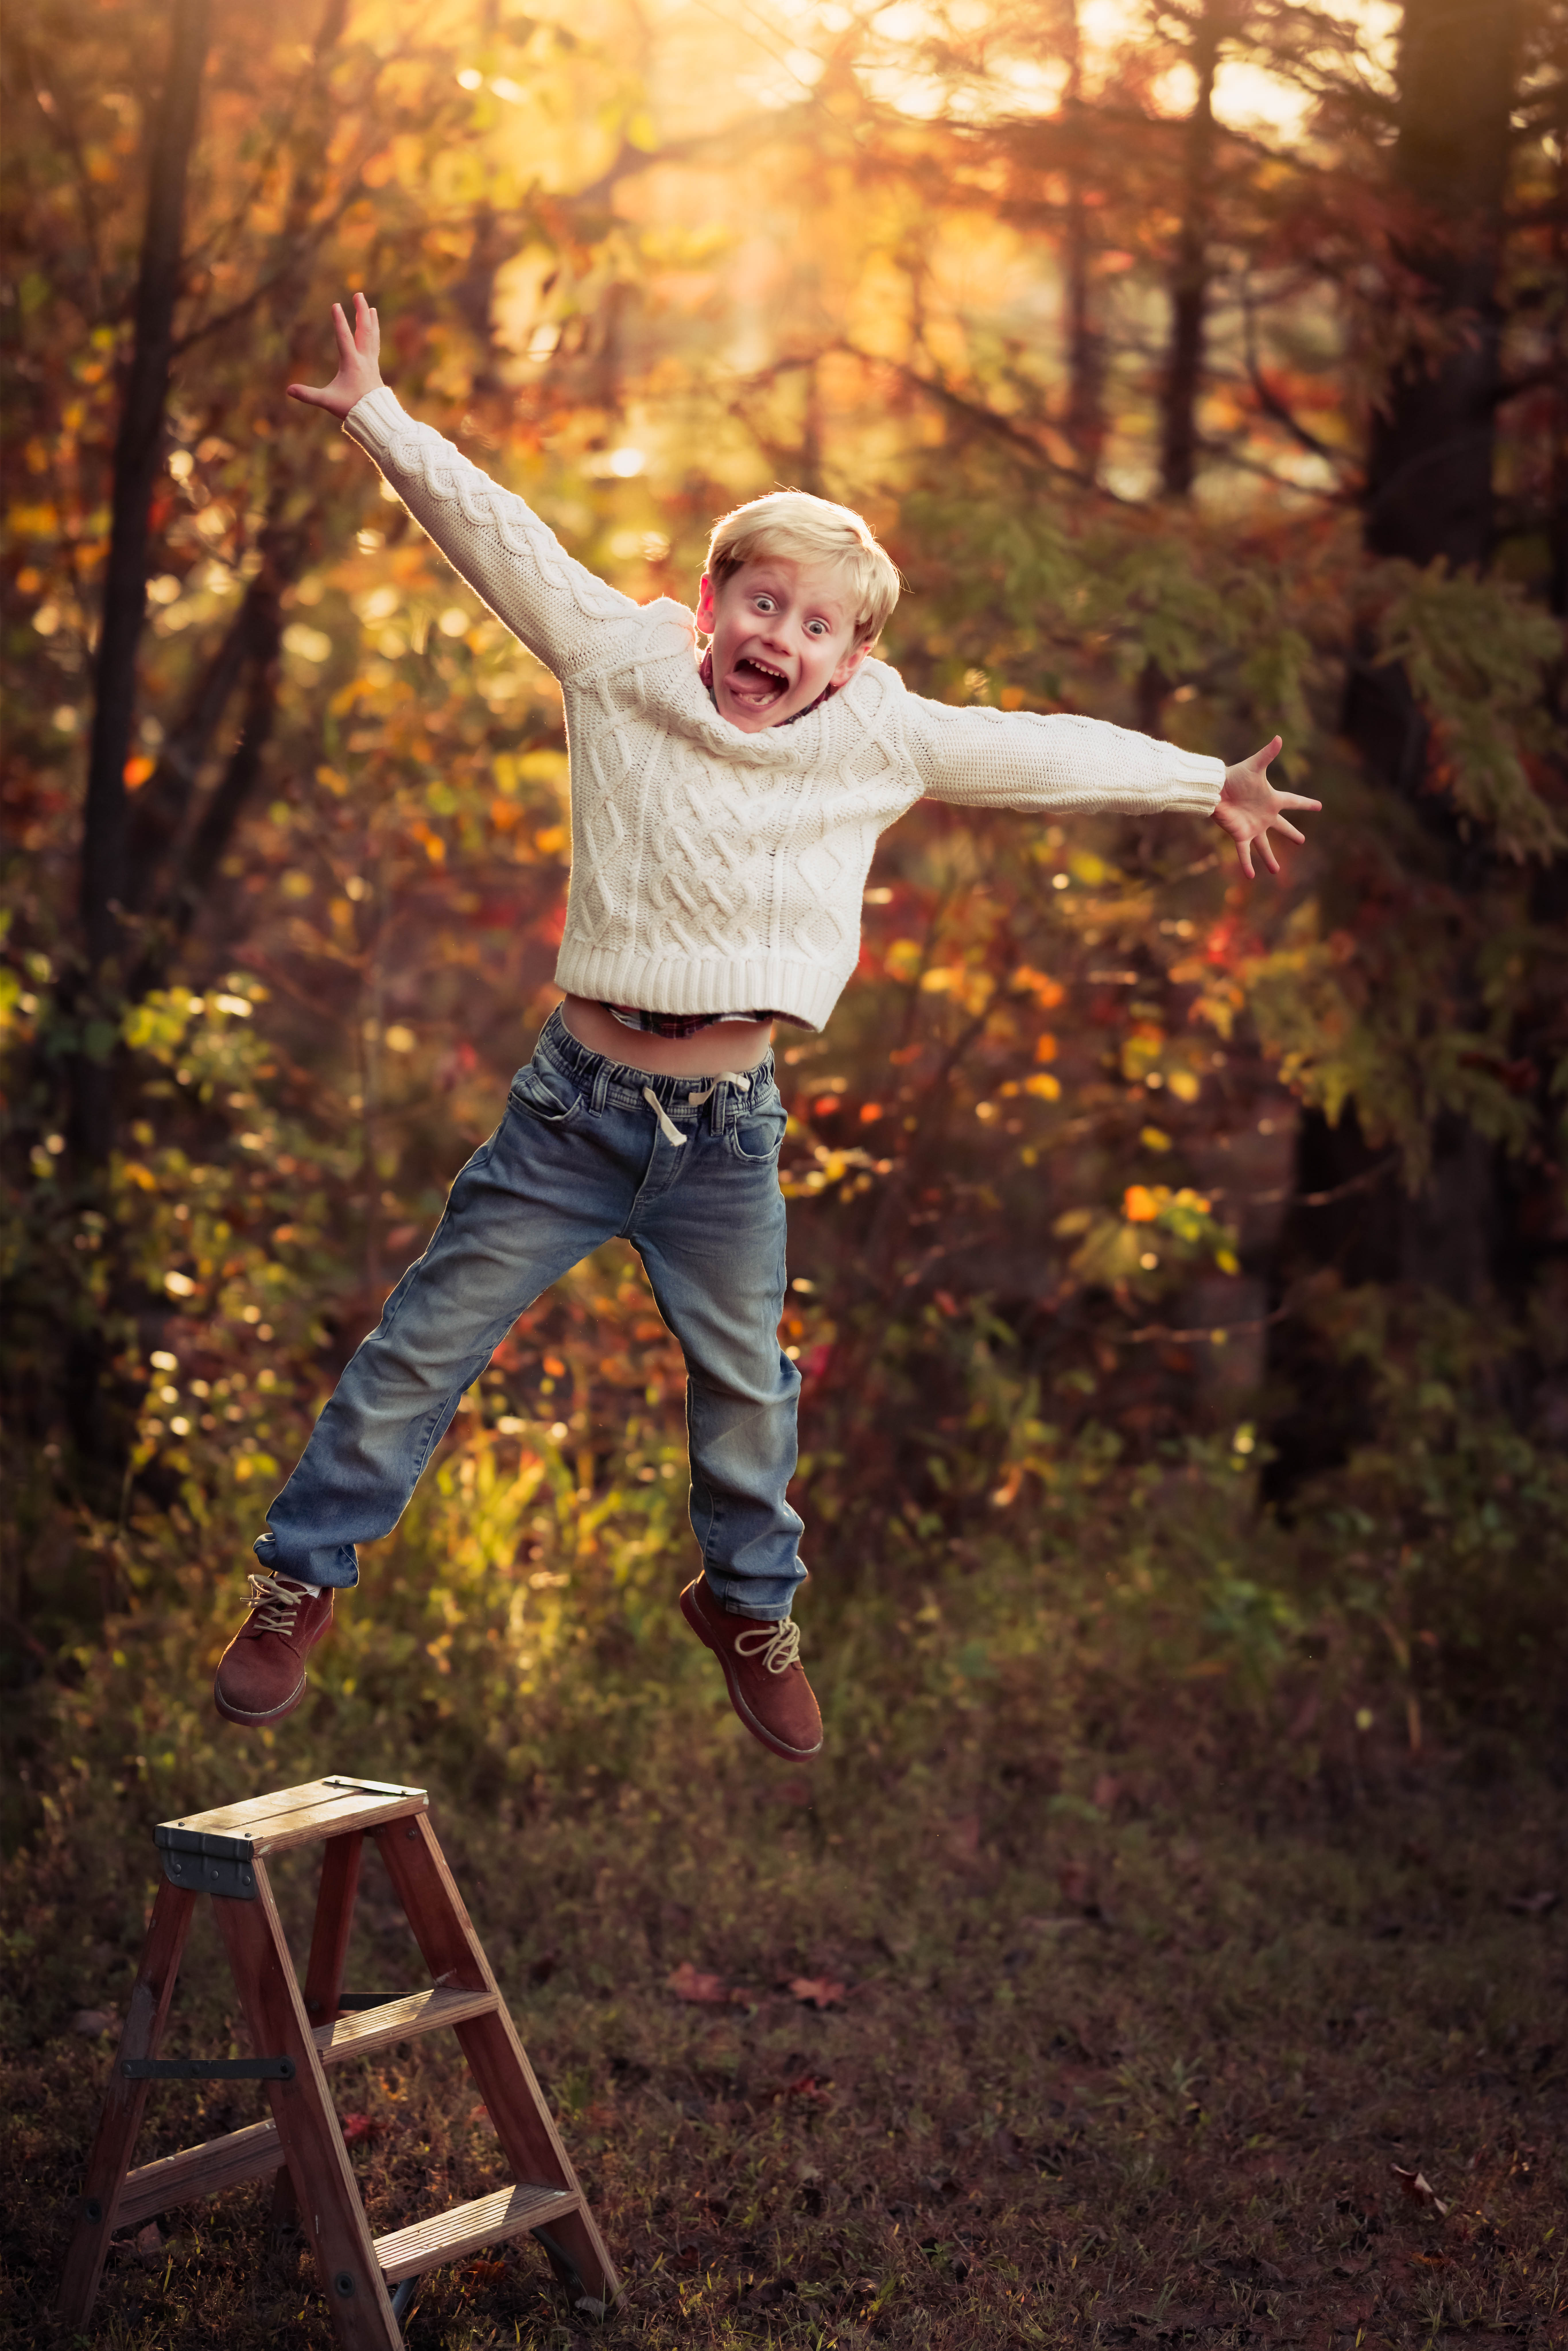 A young boy jumps off a wooden step ladder with arms out making a funny face in a forest raleigh toy stores